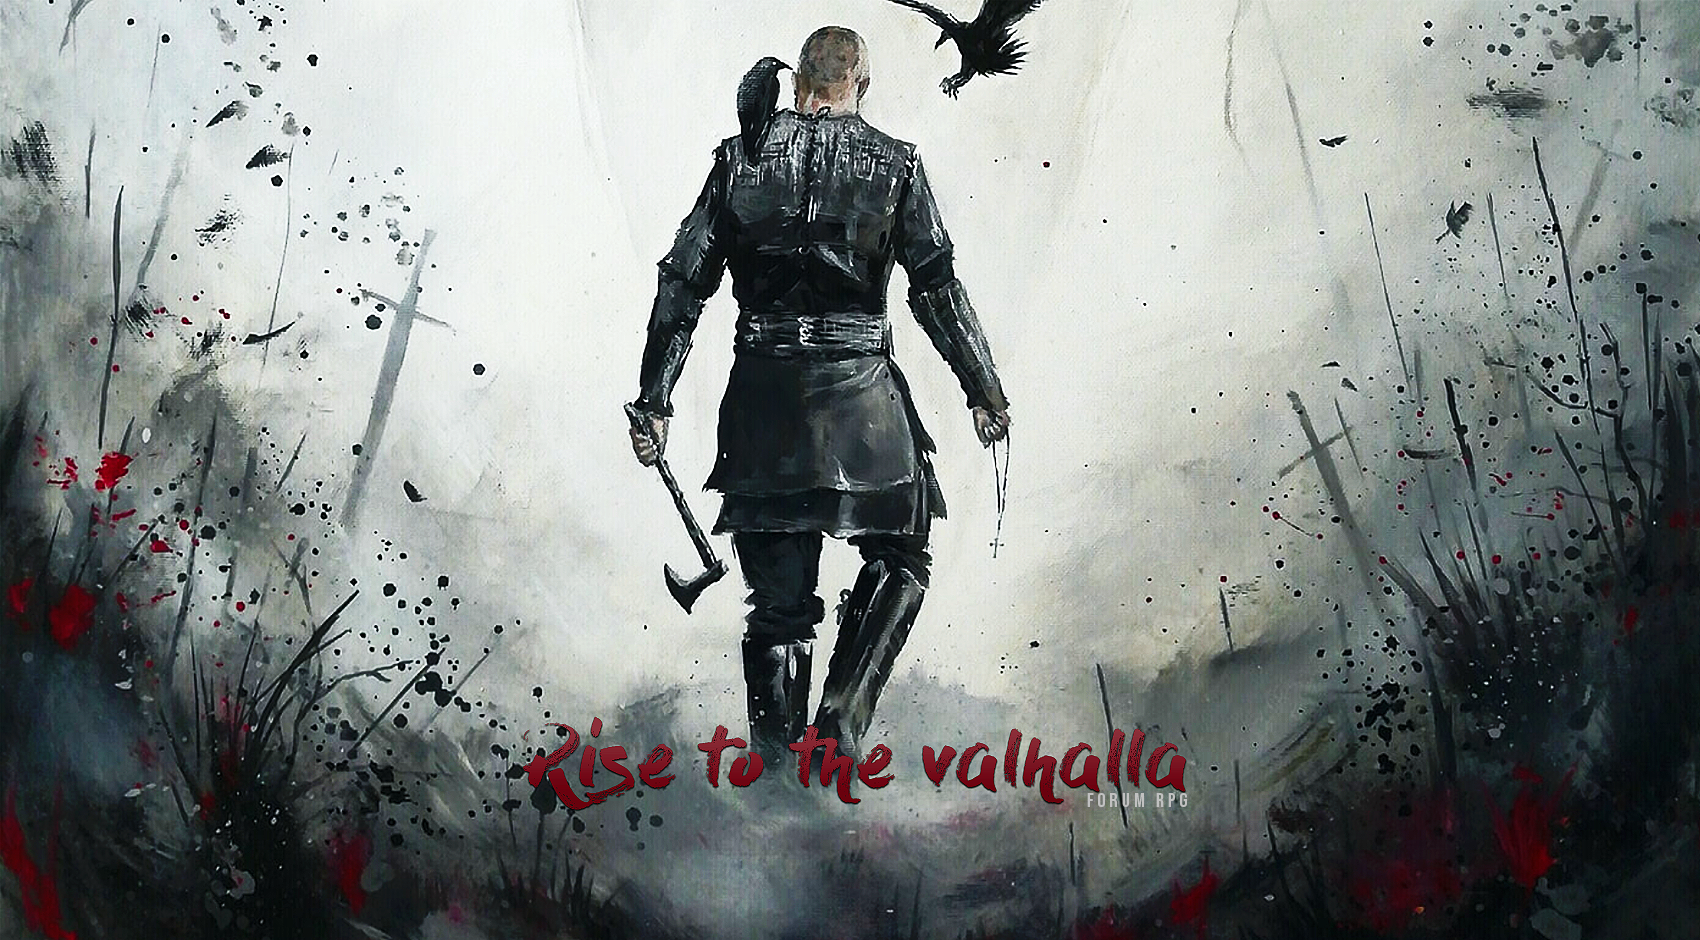 RISE TO THE VALHALLA